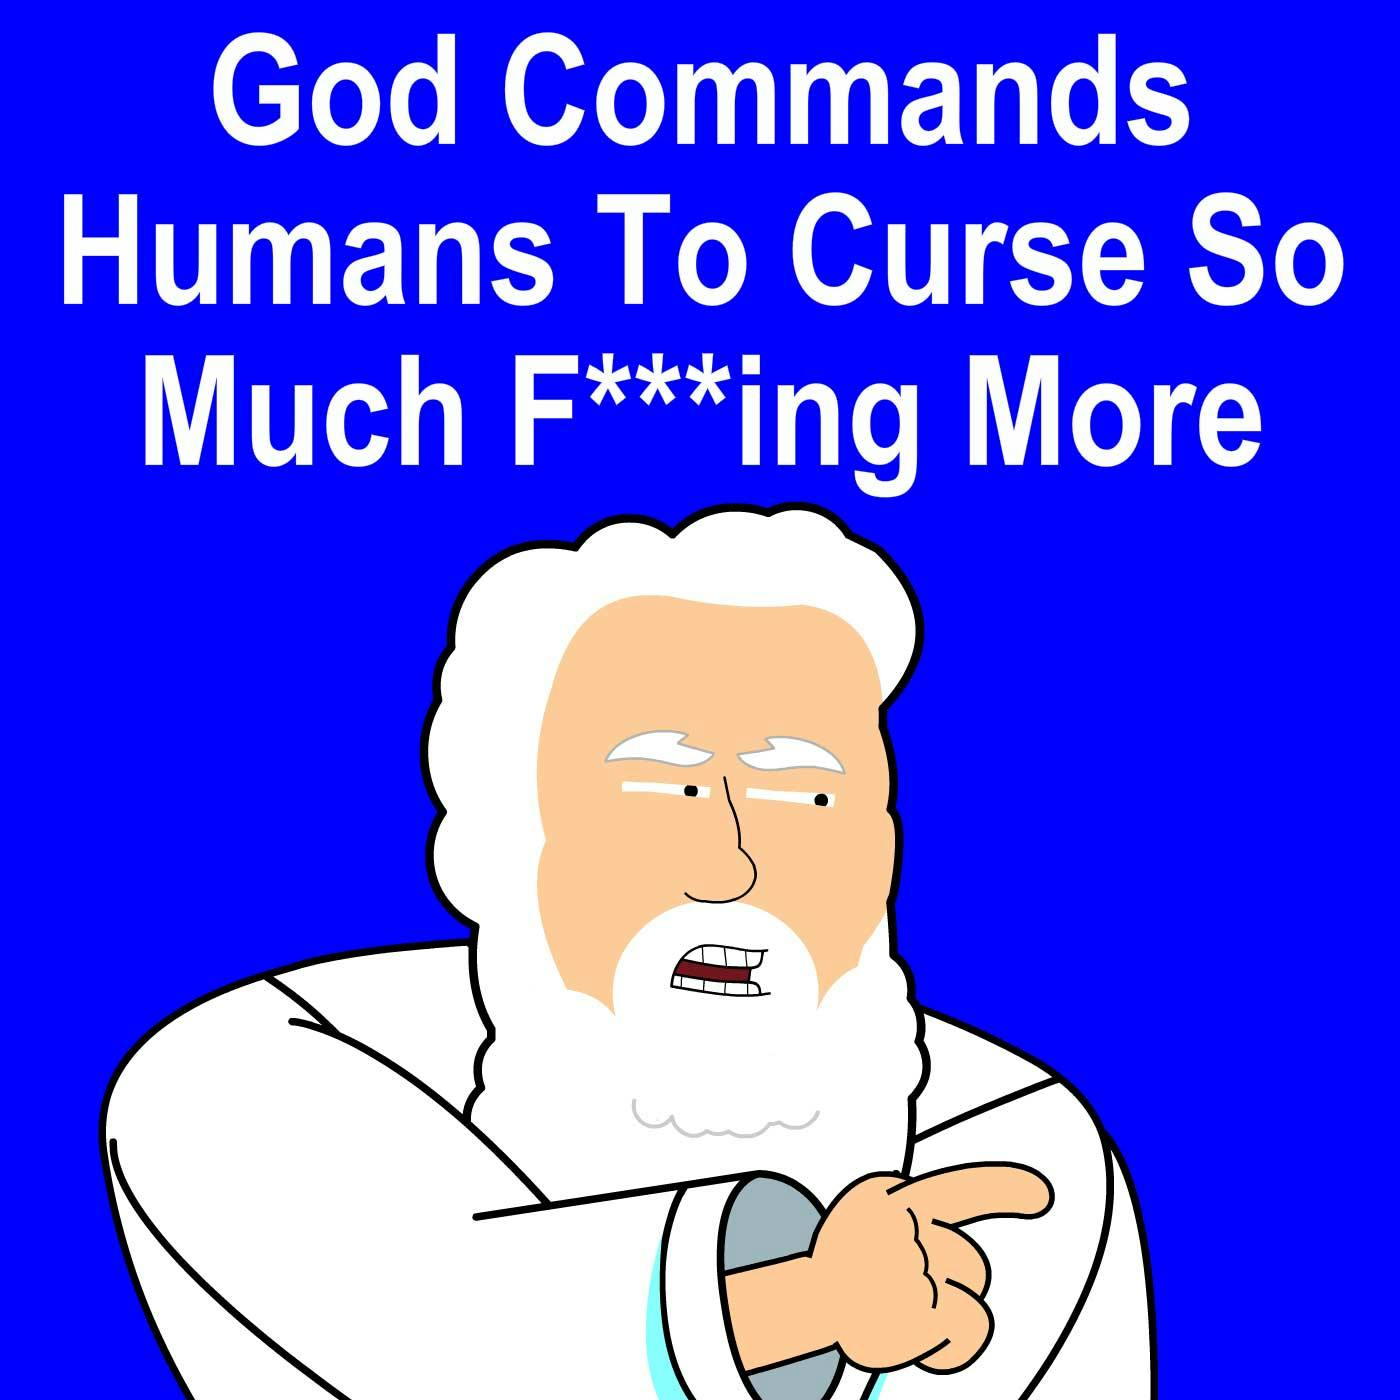 God Commands Humans To Curse So Much F***ing More